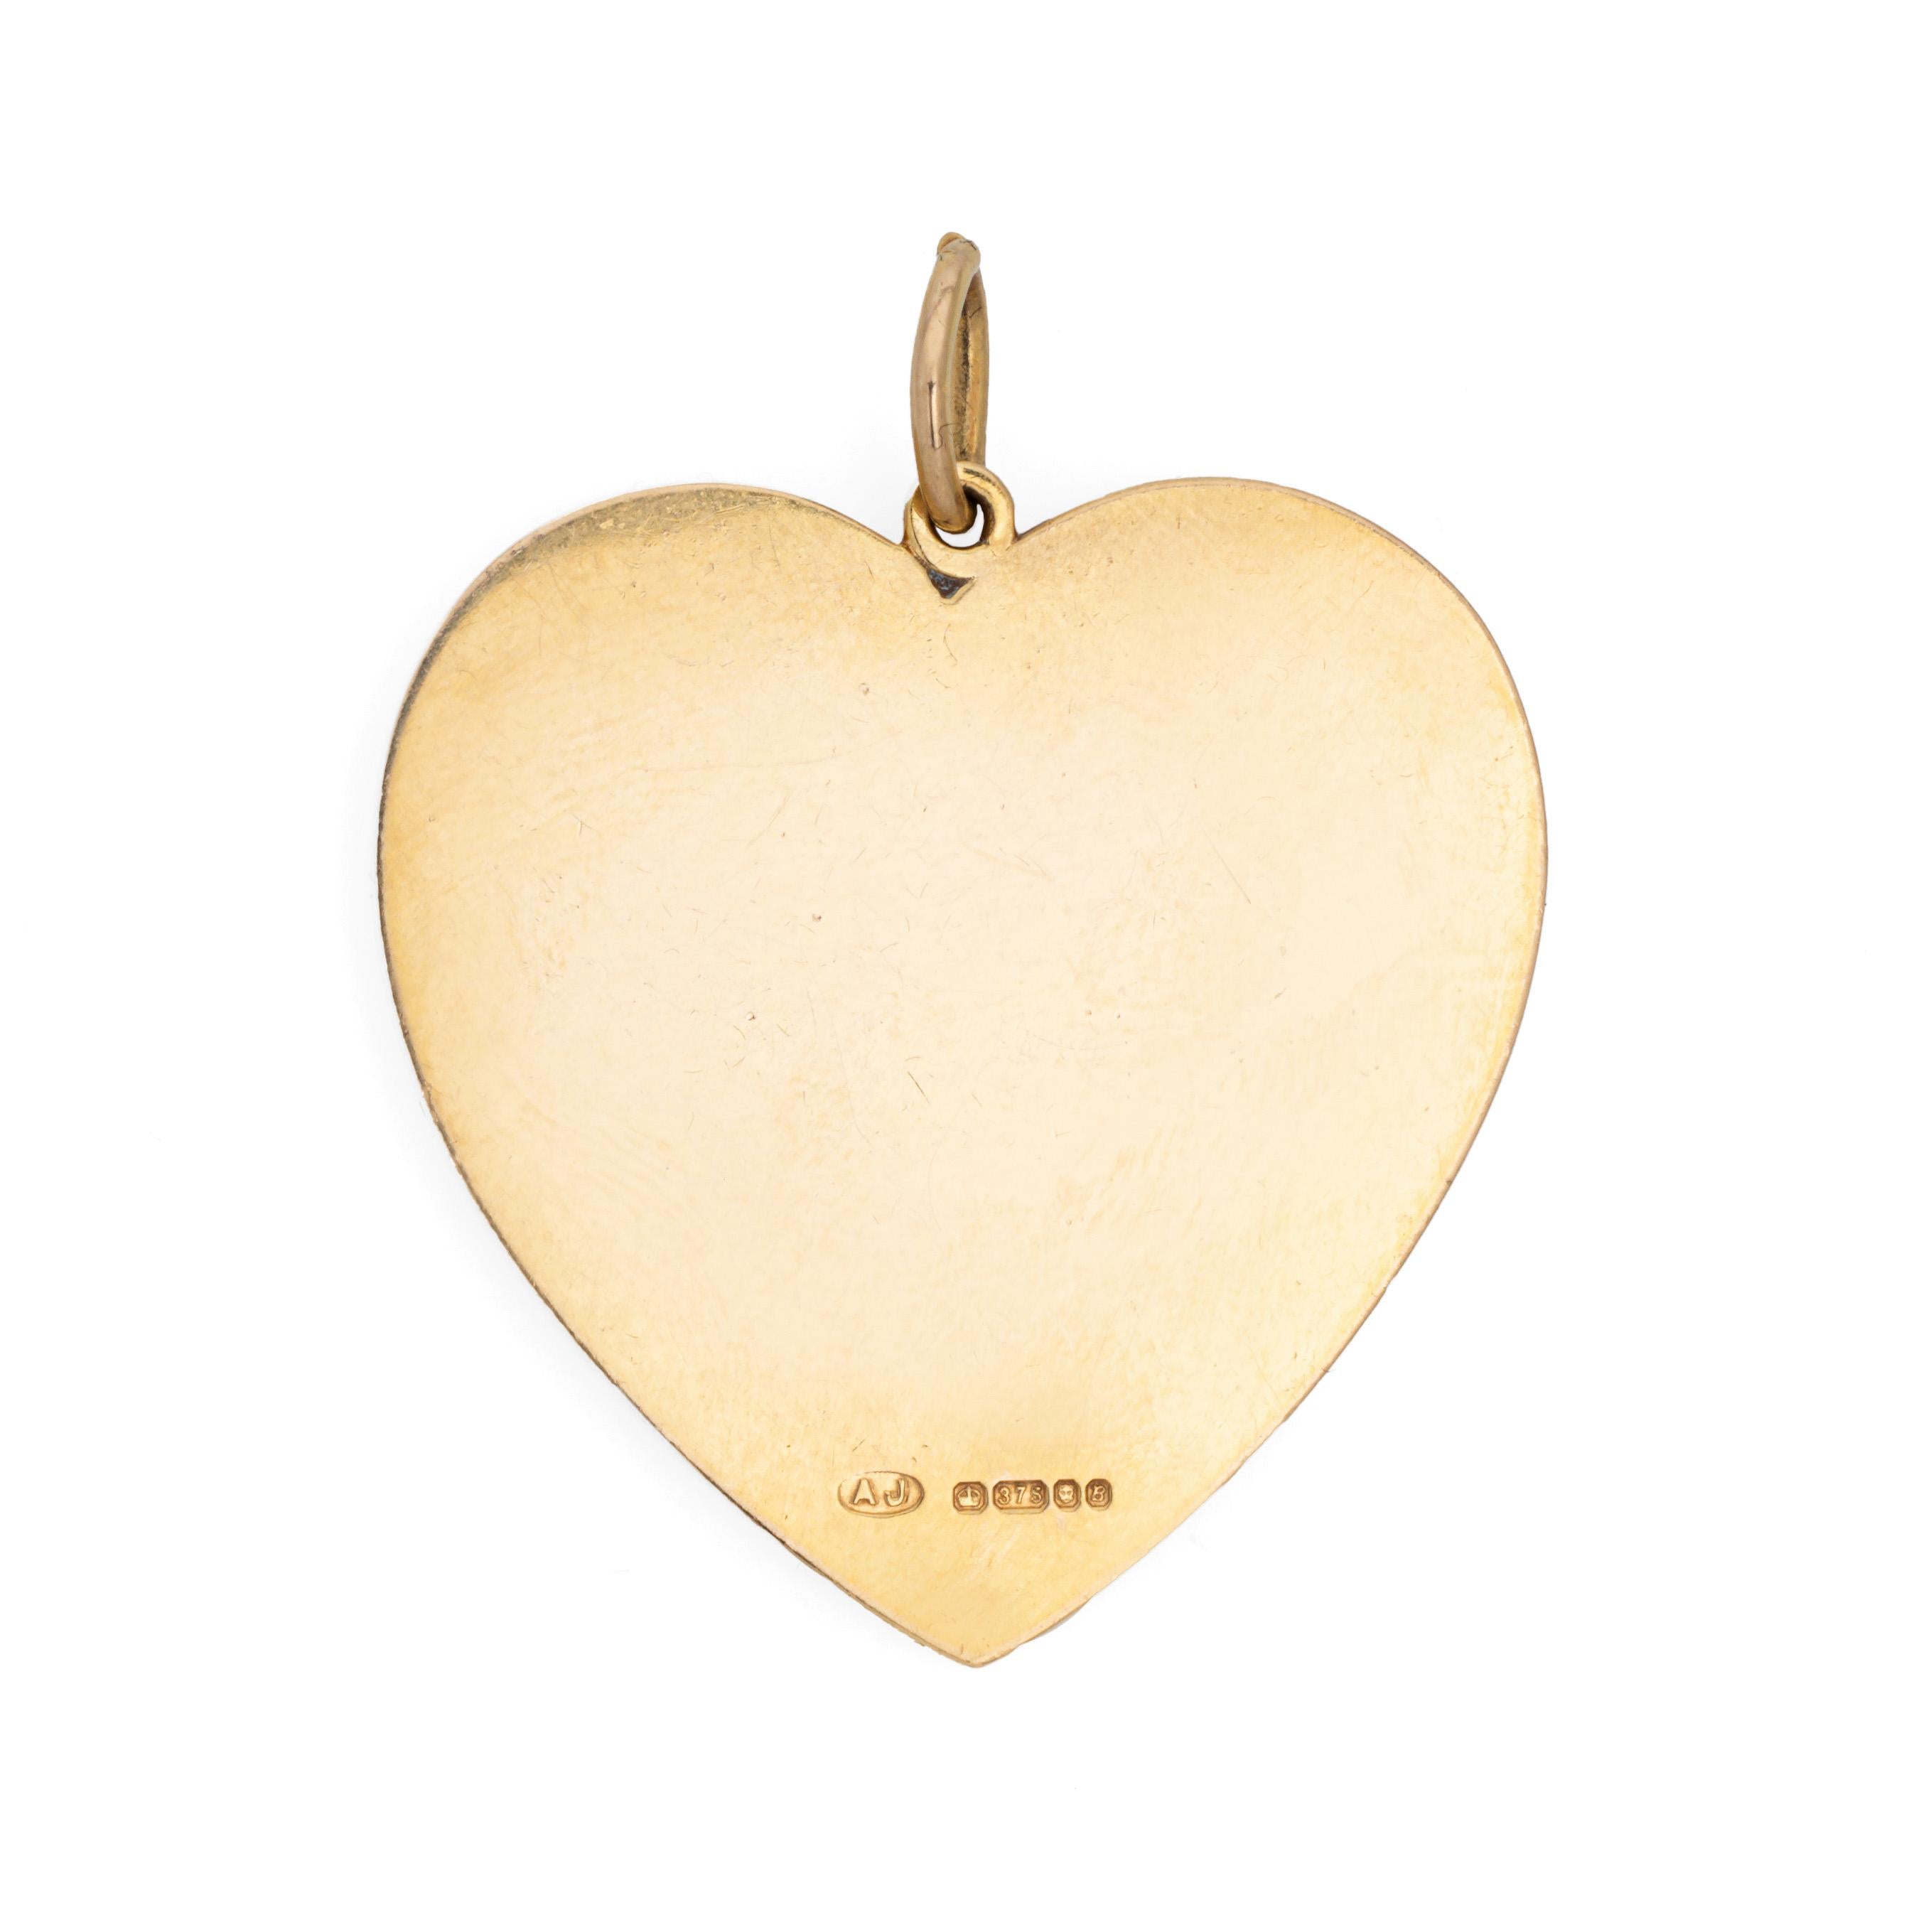 Stylish vintage heart pendant crafted in 9k yellow gold (circa 1976).   

With a wedding bell to the center of the large heart, the romantic piece celebrates one of life's big milestones. English hallmarked (see below) in London and dates to 1976.